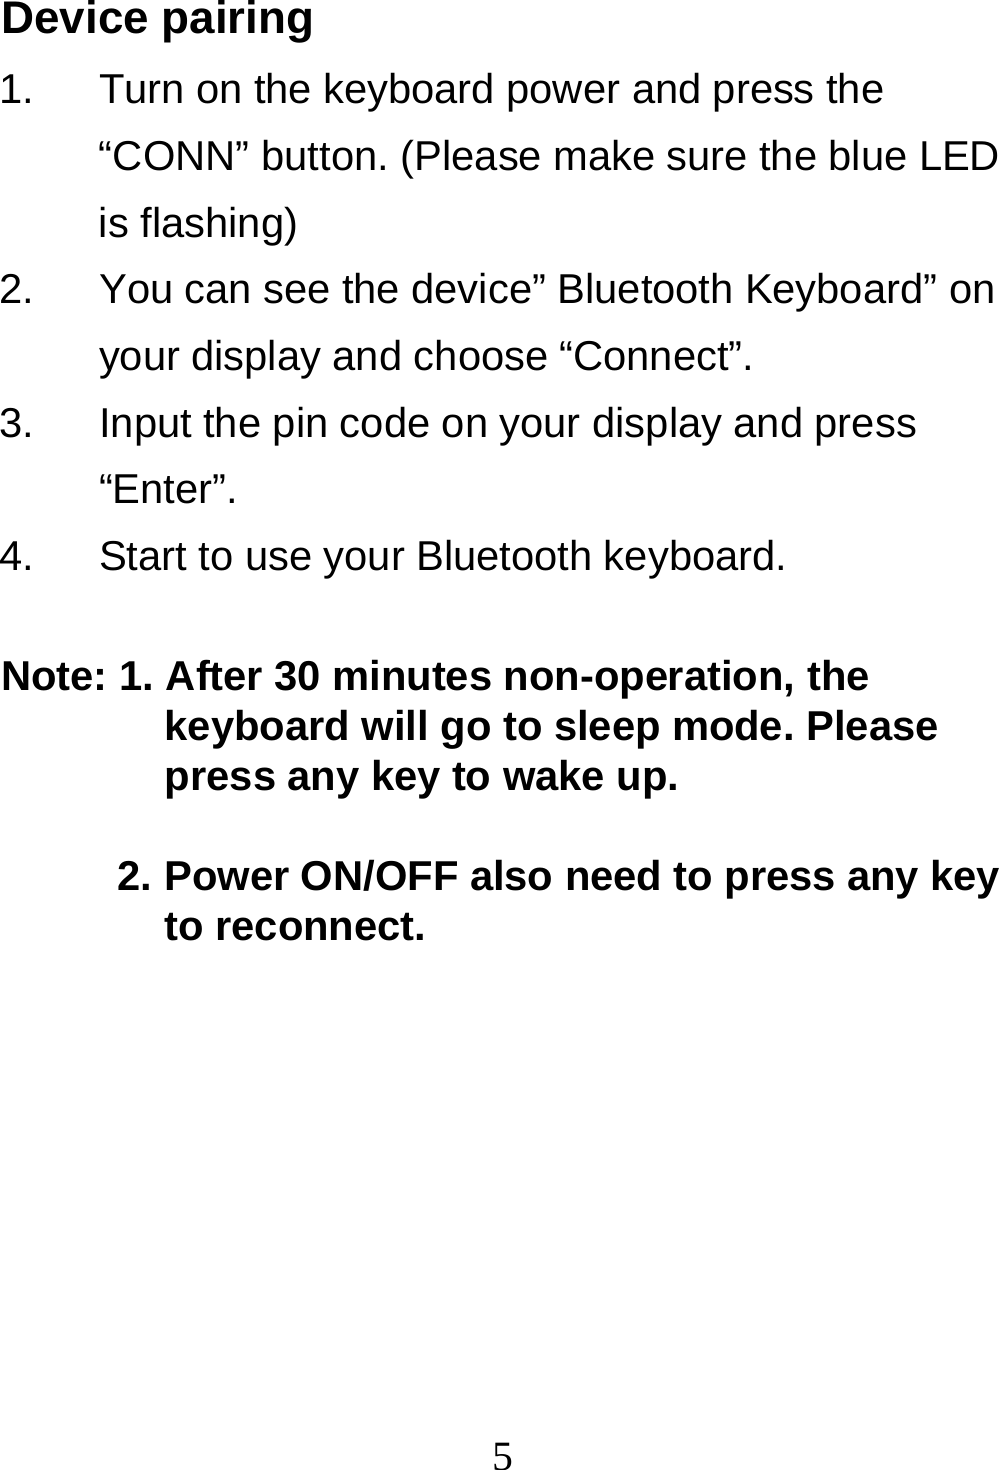  5Device pairing 1.  Turn on the keyboard power and press the “CONN” button. (Please make sure the blue LED is flashing) 2.  You can see the device” Bluetooth Keyboard” on your display and choose “Connect”. 3.  Input the pin code on your display and press “Enter”. 4.  Start to use your Bluetooth keyboard.  Note: 1. After 30 minutes non-operation, the keyboard will go to sleep mode. Please press any key to wake up.   2. Power ON/OFF also need to press any key to reconnect.  